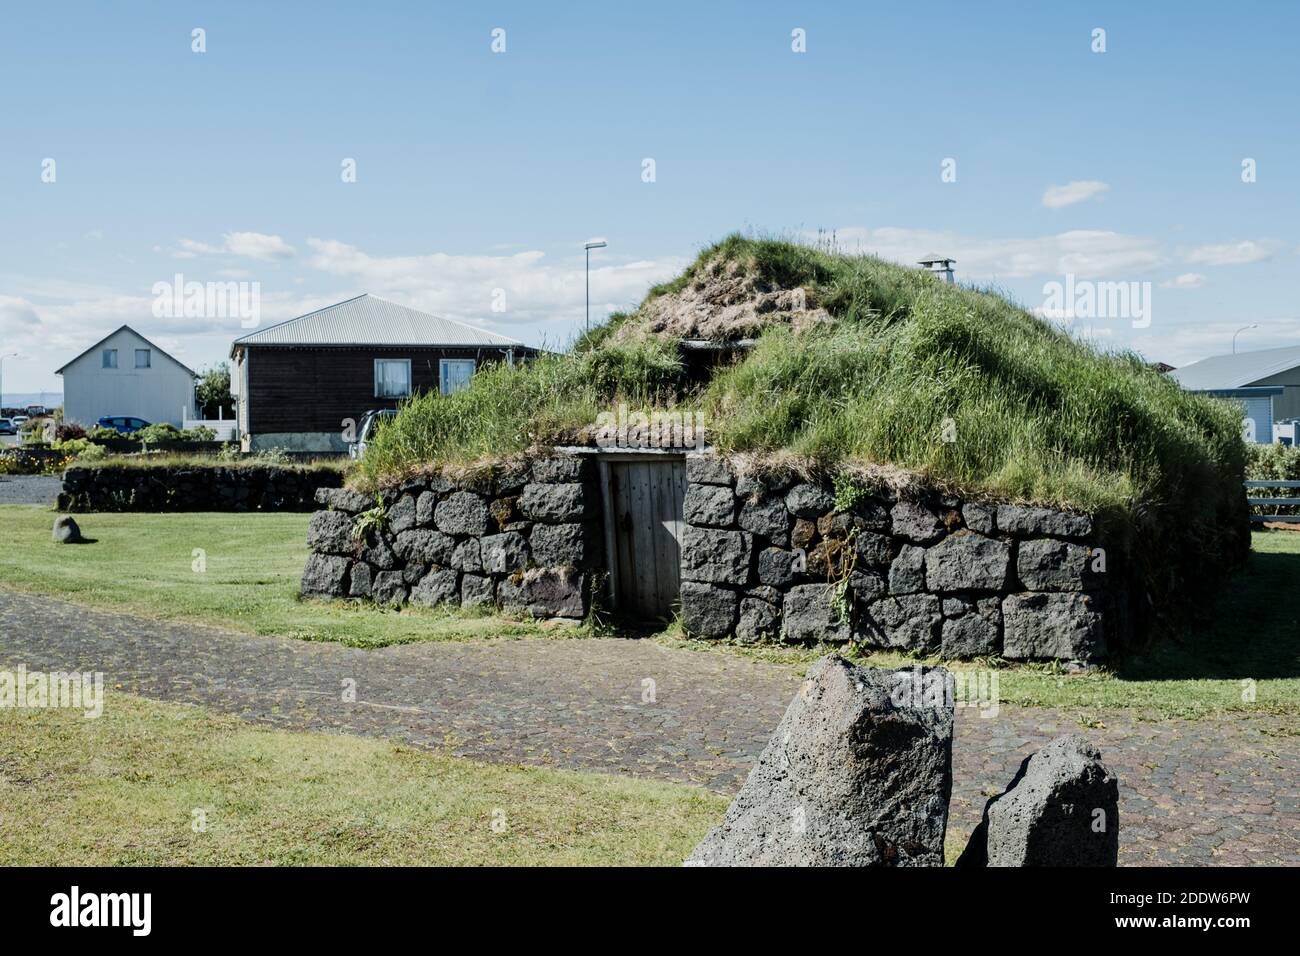 Þuríðarbúð Folk Museum is an old fishing hut made with a turf roof and was opened in 1949 in memory of Þuríður Einarsdóttir. Located in Stokkseyri Stock Photo